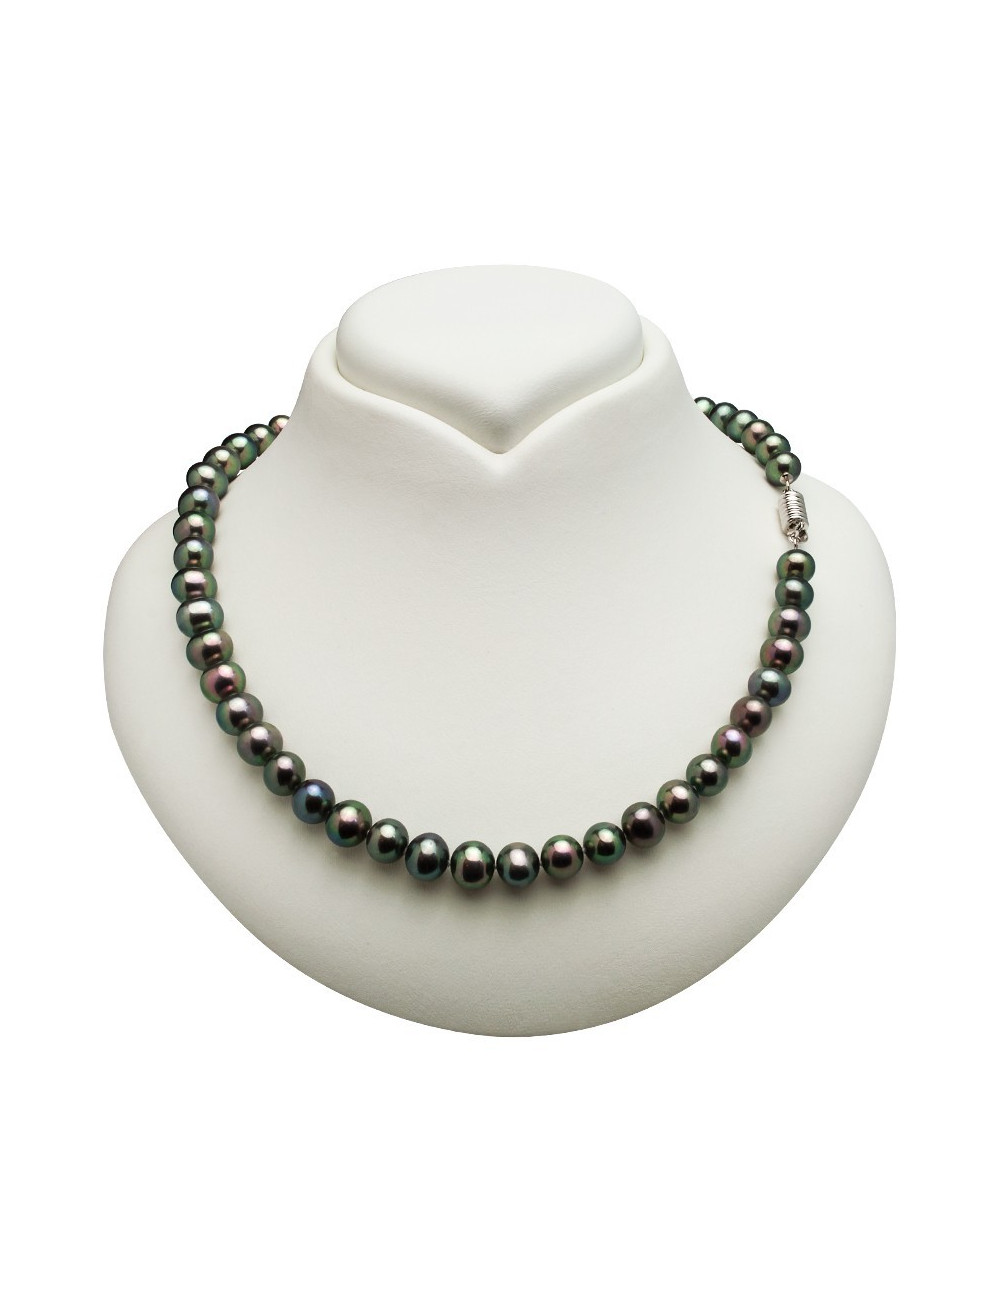 Necklace of dark green pearls topped with an oblong white gold clasp NO89G8